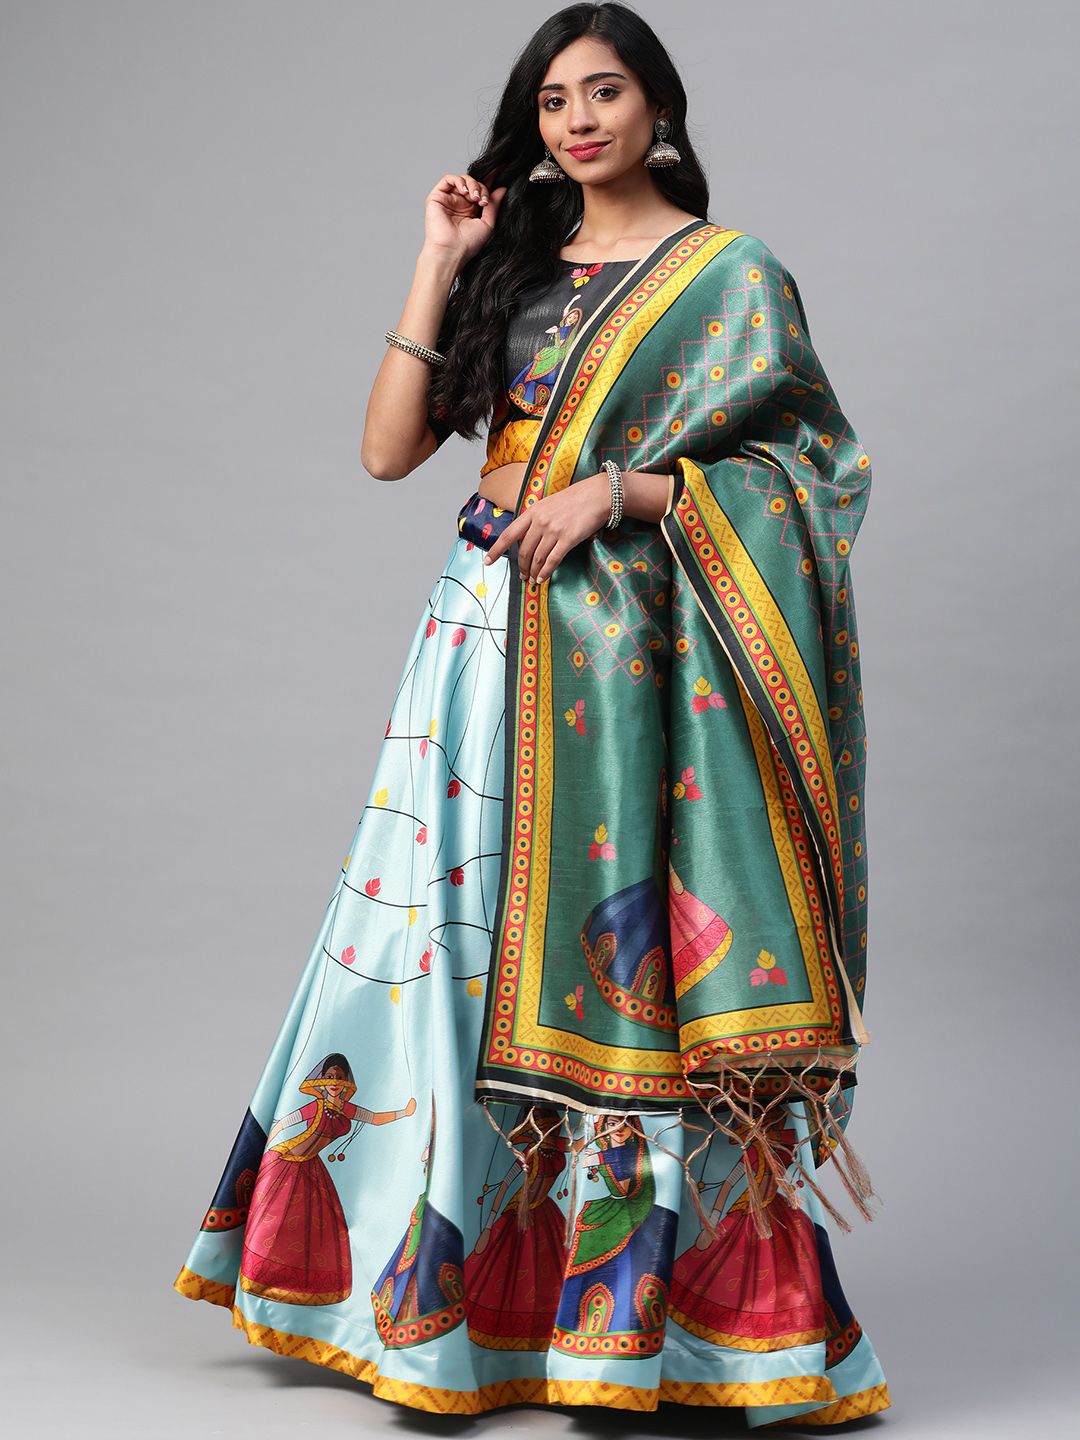 SHUBHVASTRA Turquoise Blue Printed Semi-Stitched Lehenga & Unstitched Blouse With Dupatta Price in India